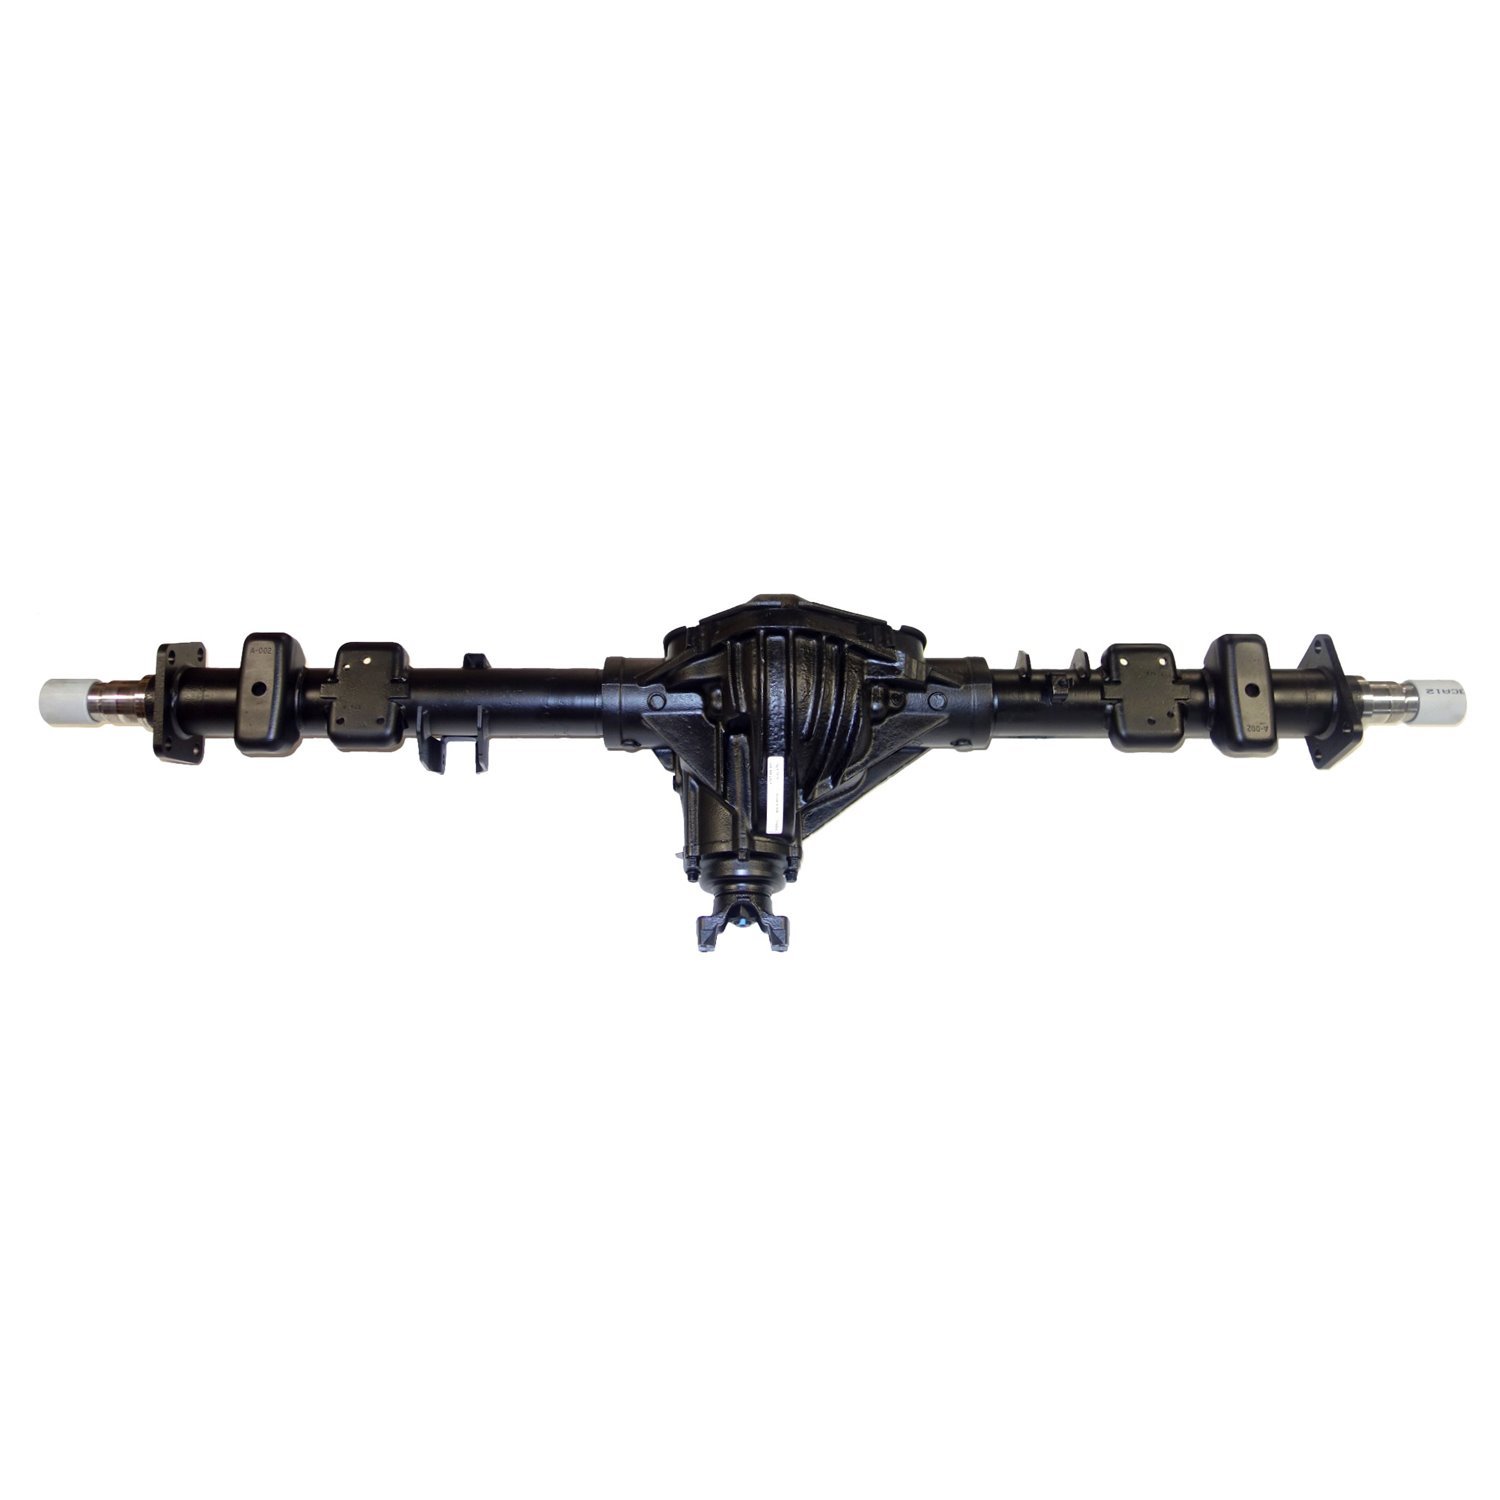 Remanufactured Axle Assy for GM 14 Bolt Truck 90-00 GM 3500 Pickup 4.10 , 2wd, SRW